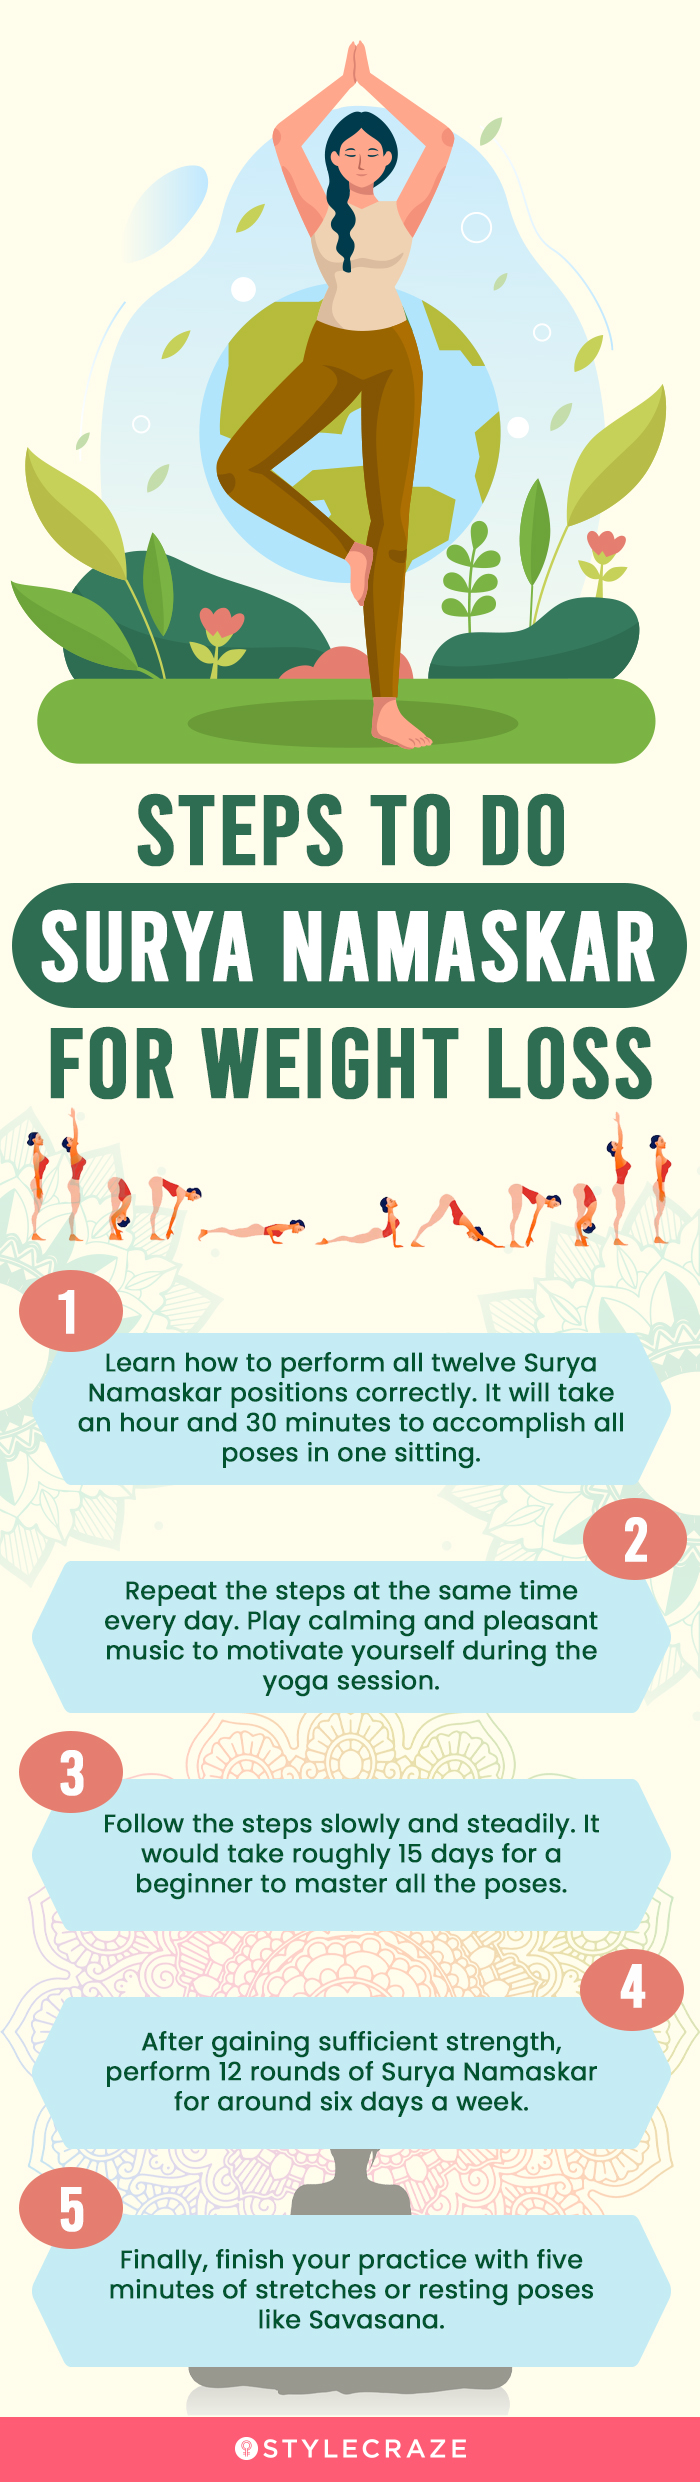 steps to do surya namaskar for weight loss (infographic)